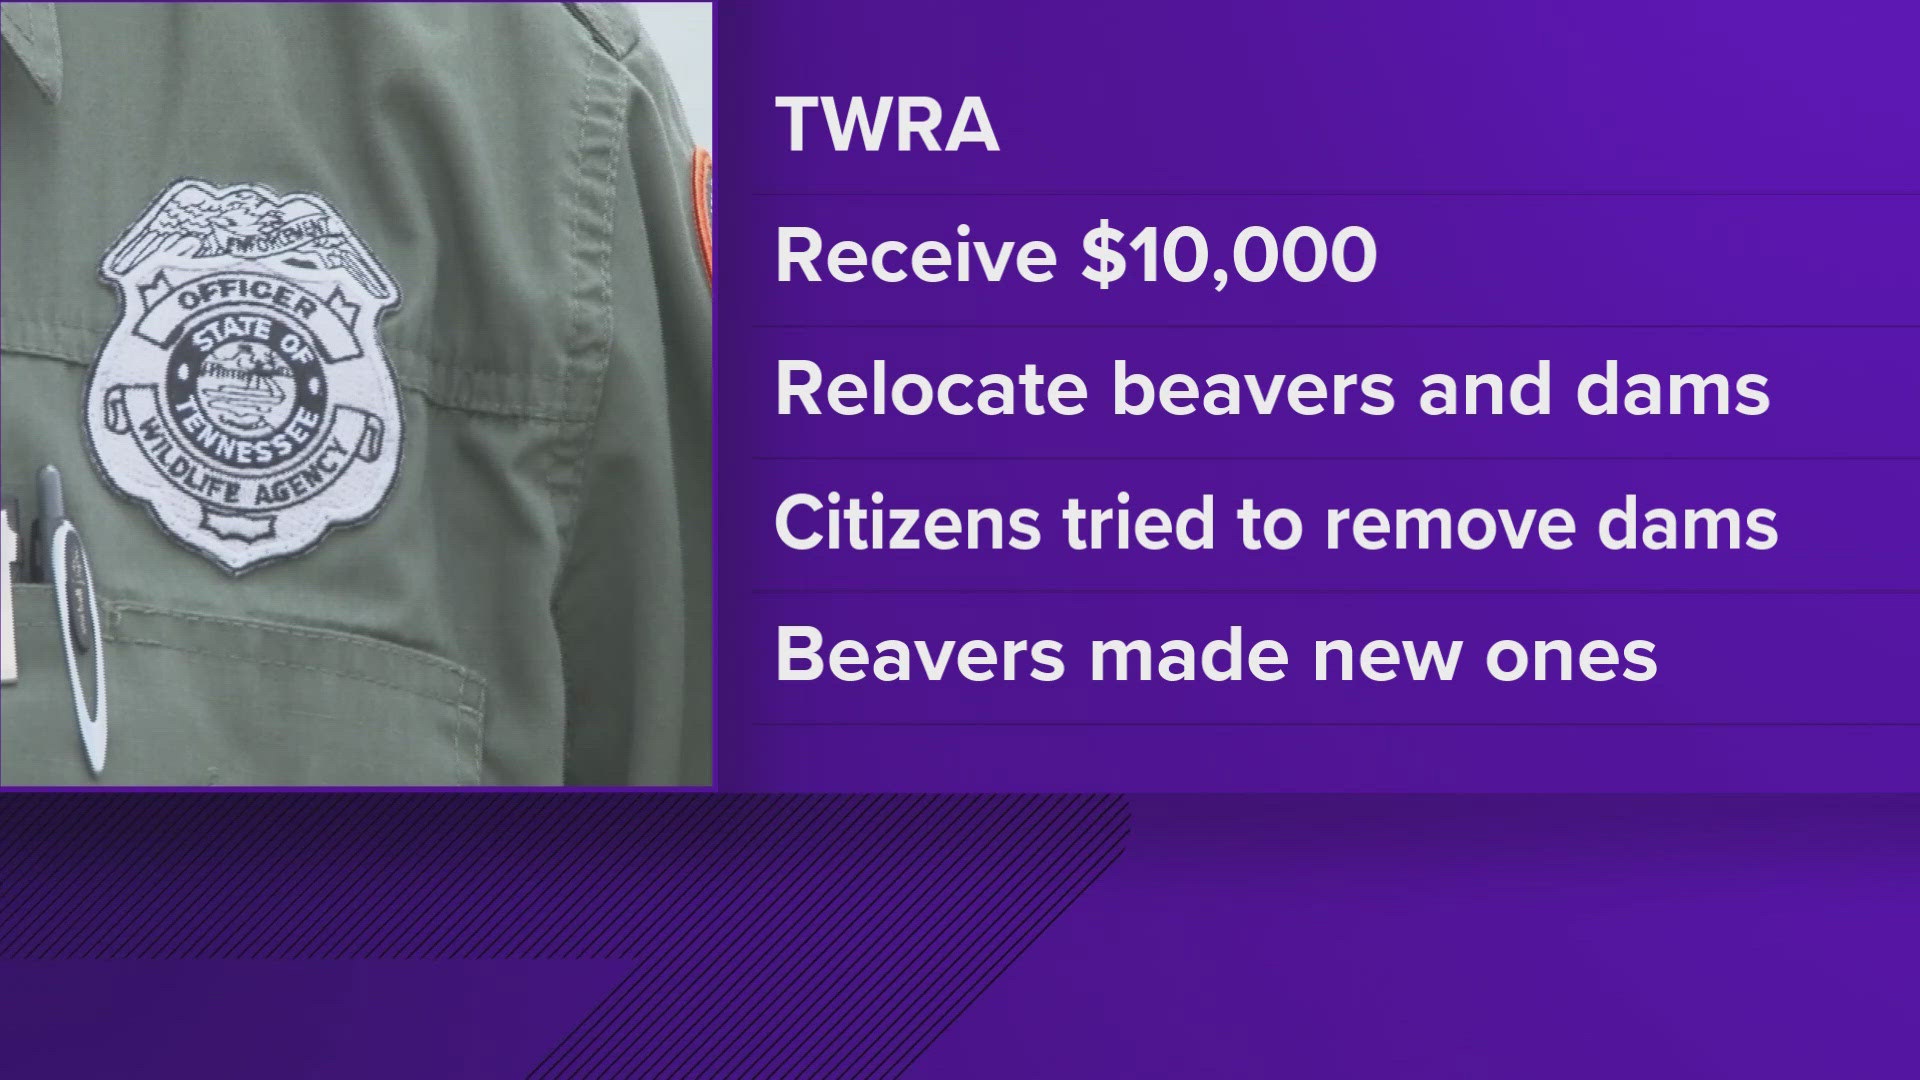 The Tennessee Wildlife Resource Agency will receive $10,000 in state funding to humanely relocate the beavers and remove dams to eliminate the flooding issues.